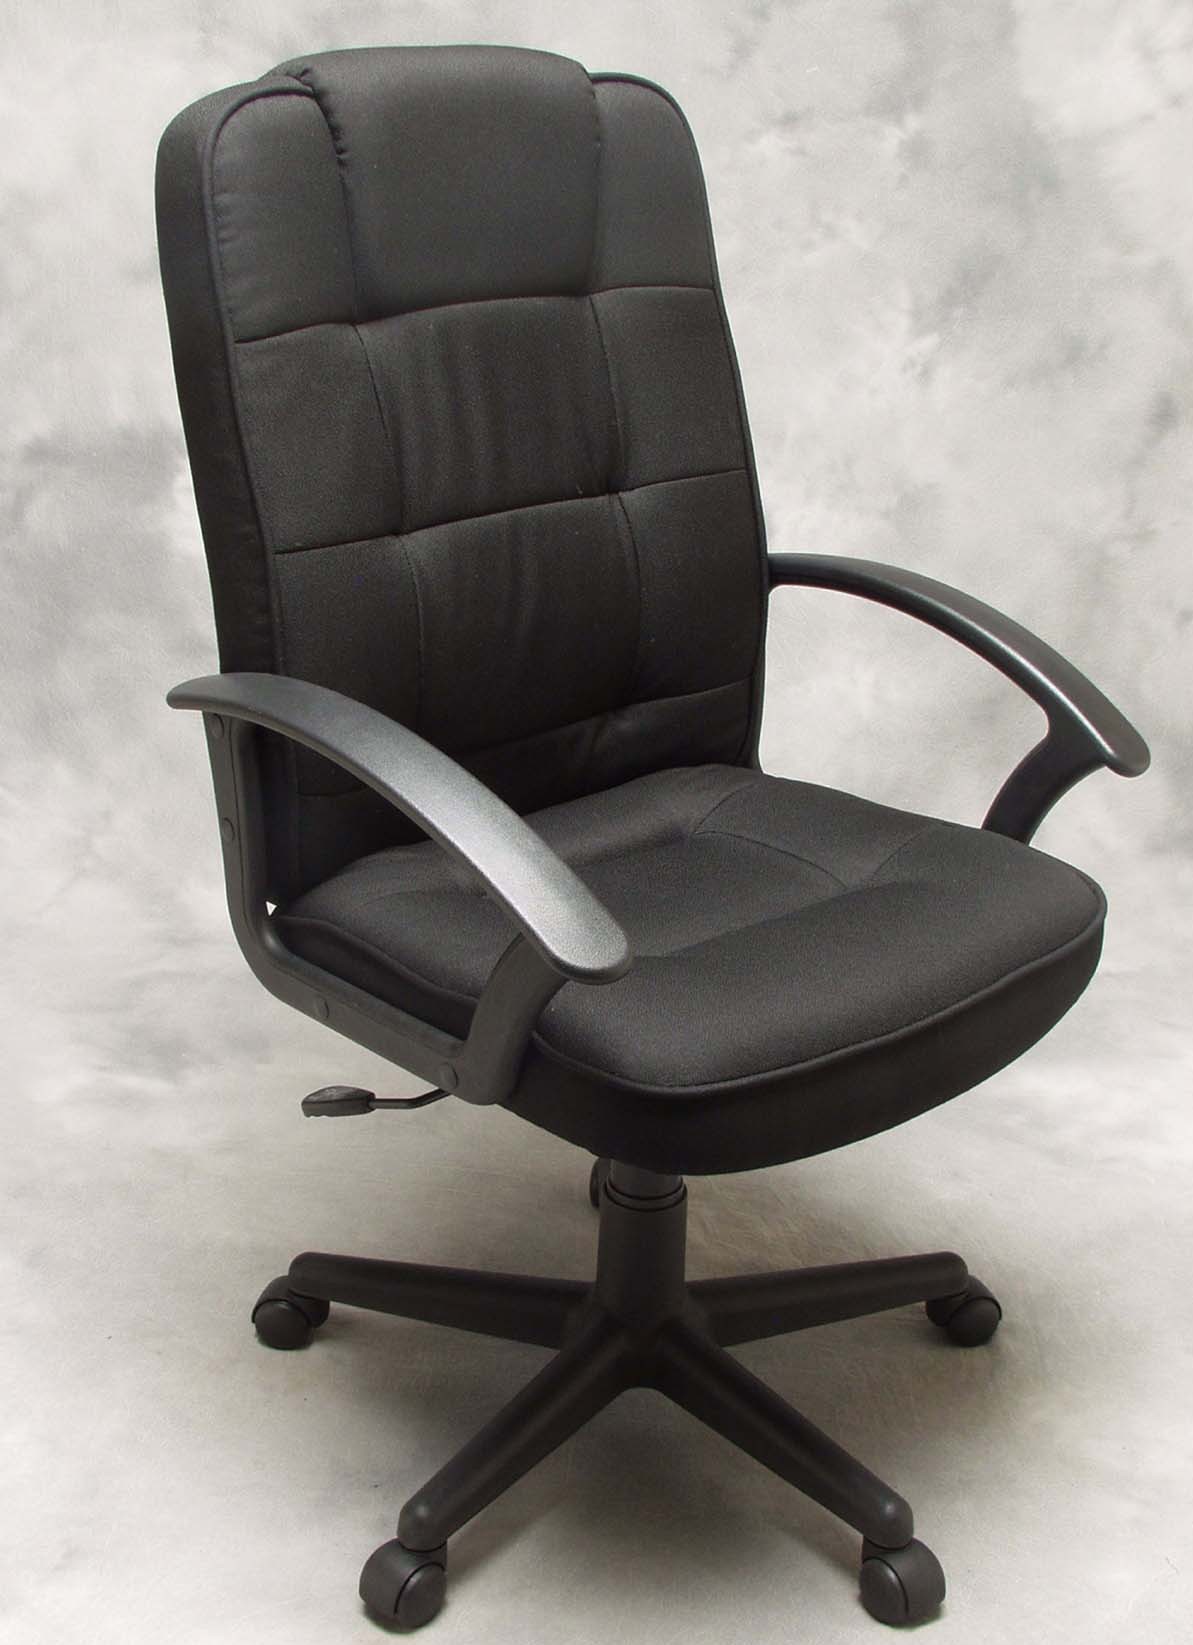 CPSC, Gruga U.S.A. Announce Recall to Repair Office Chairs Sold At 